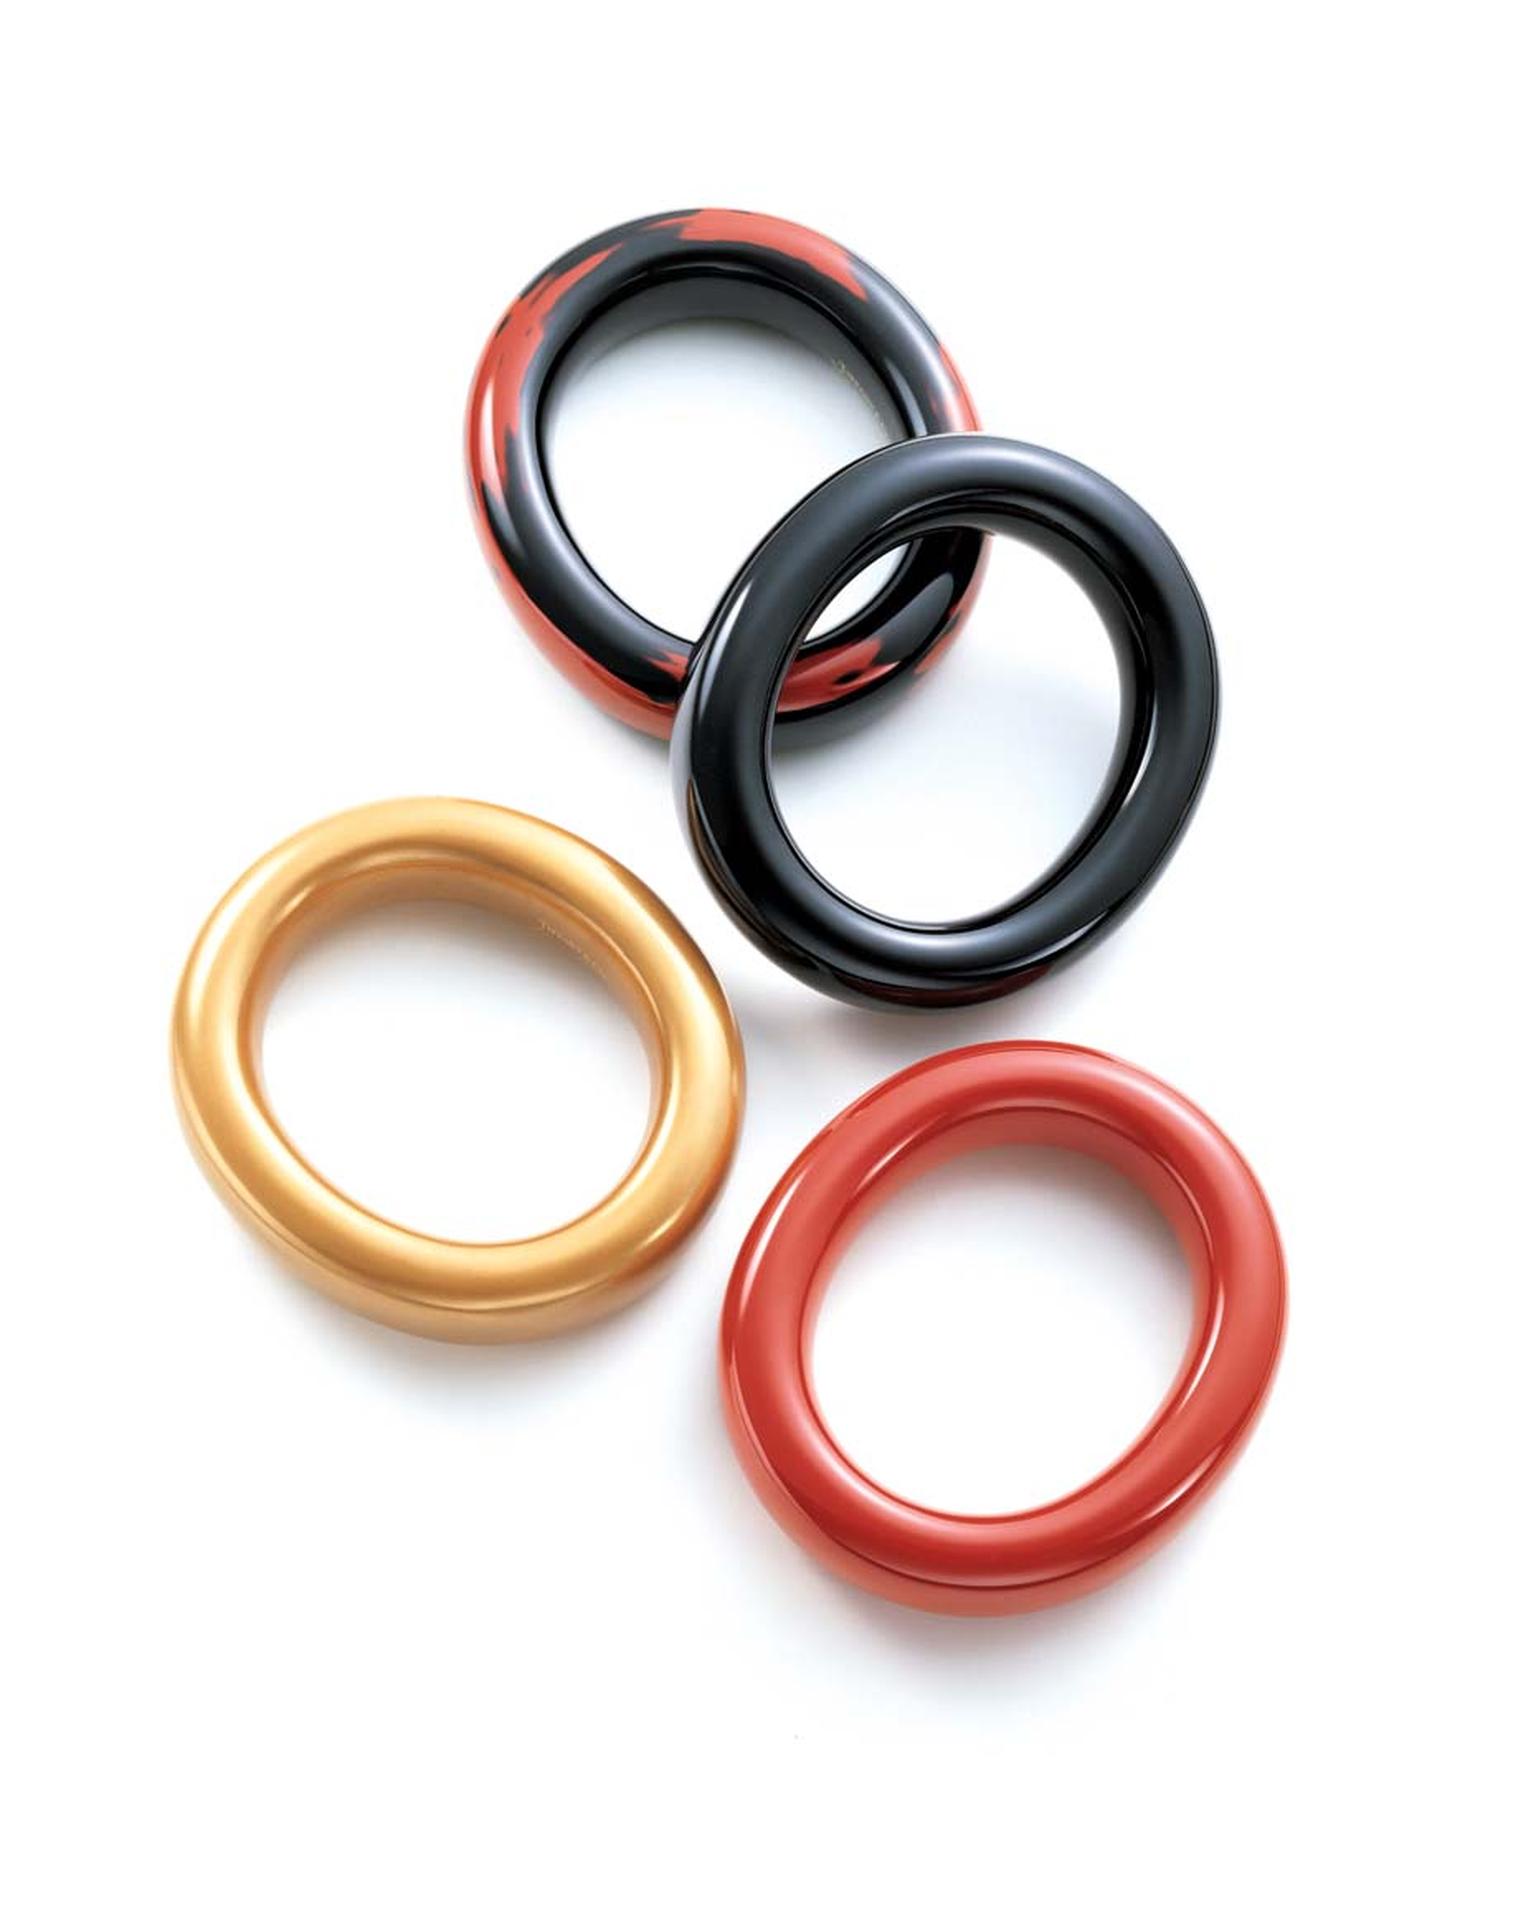 Elsa Peretti lacquered hardwood Doughnut bangles  also available in sterling silver and gold.